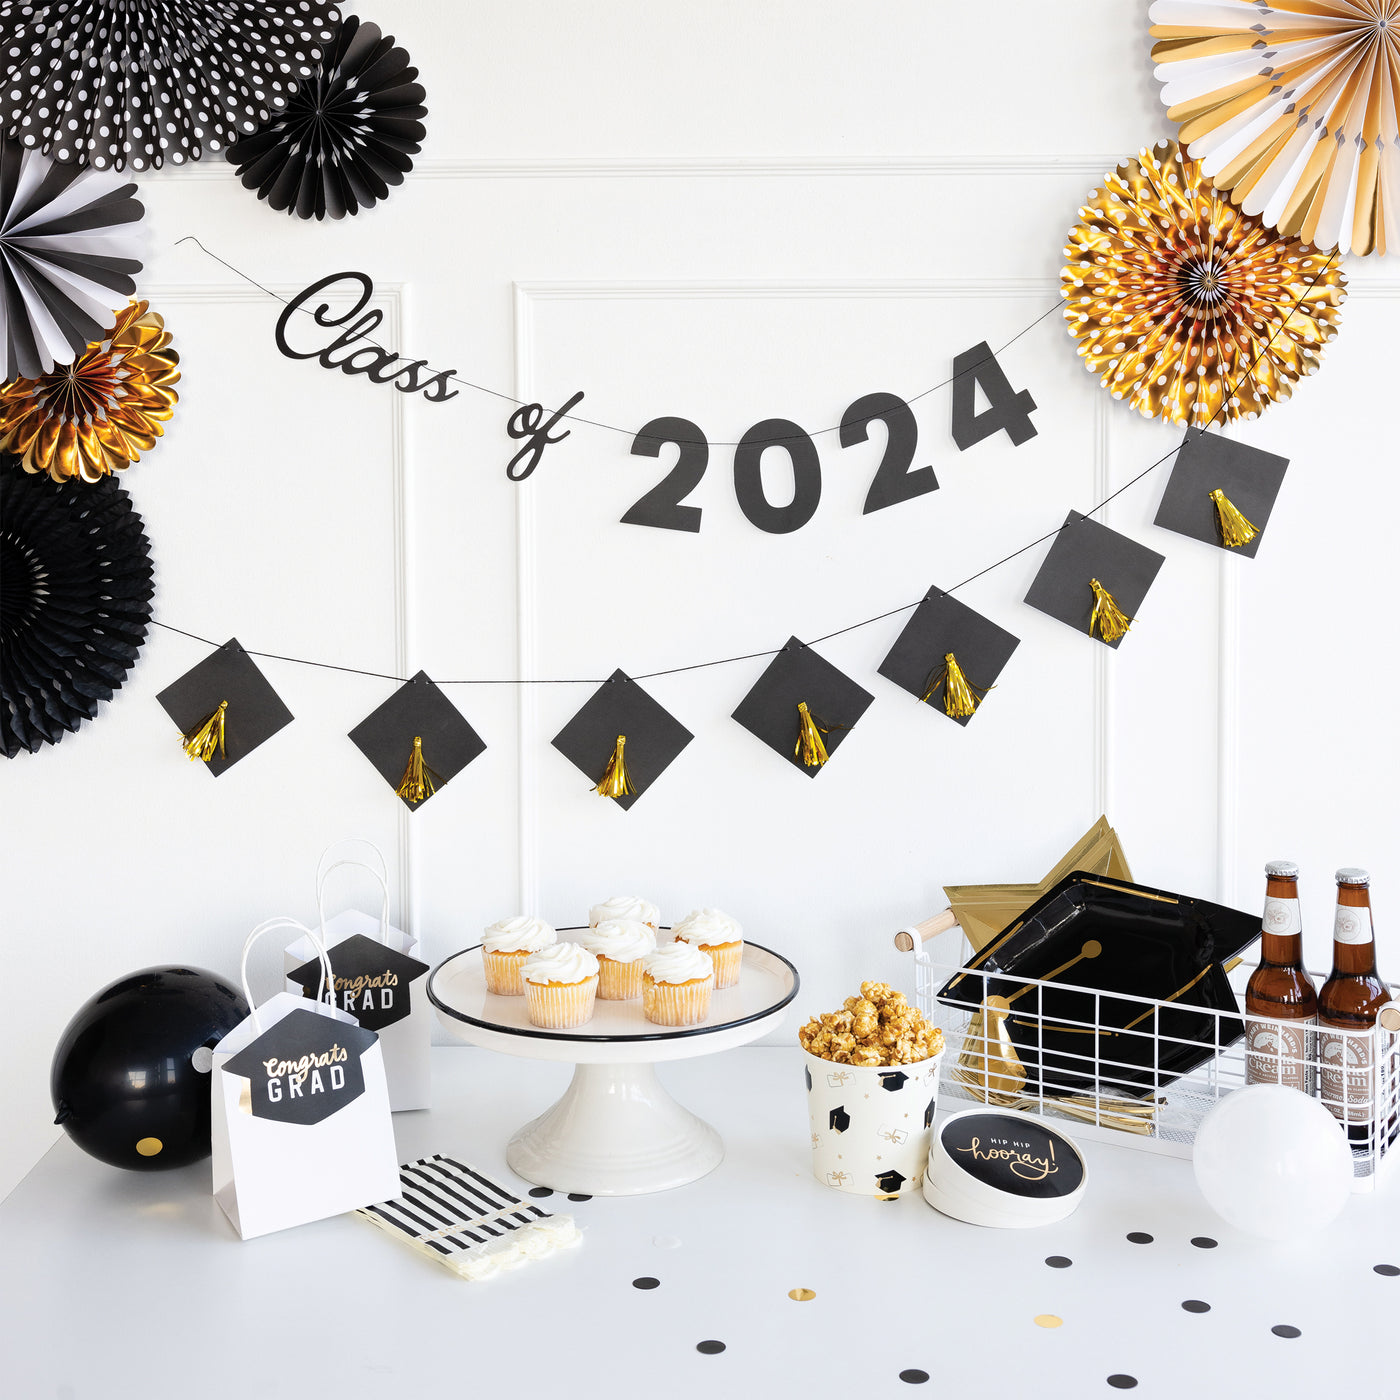 PLFN02 - Black and White Party Fan Set